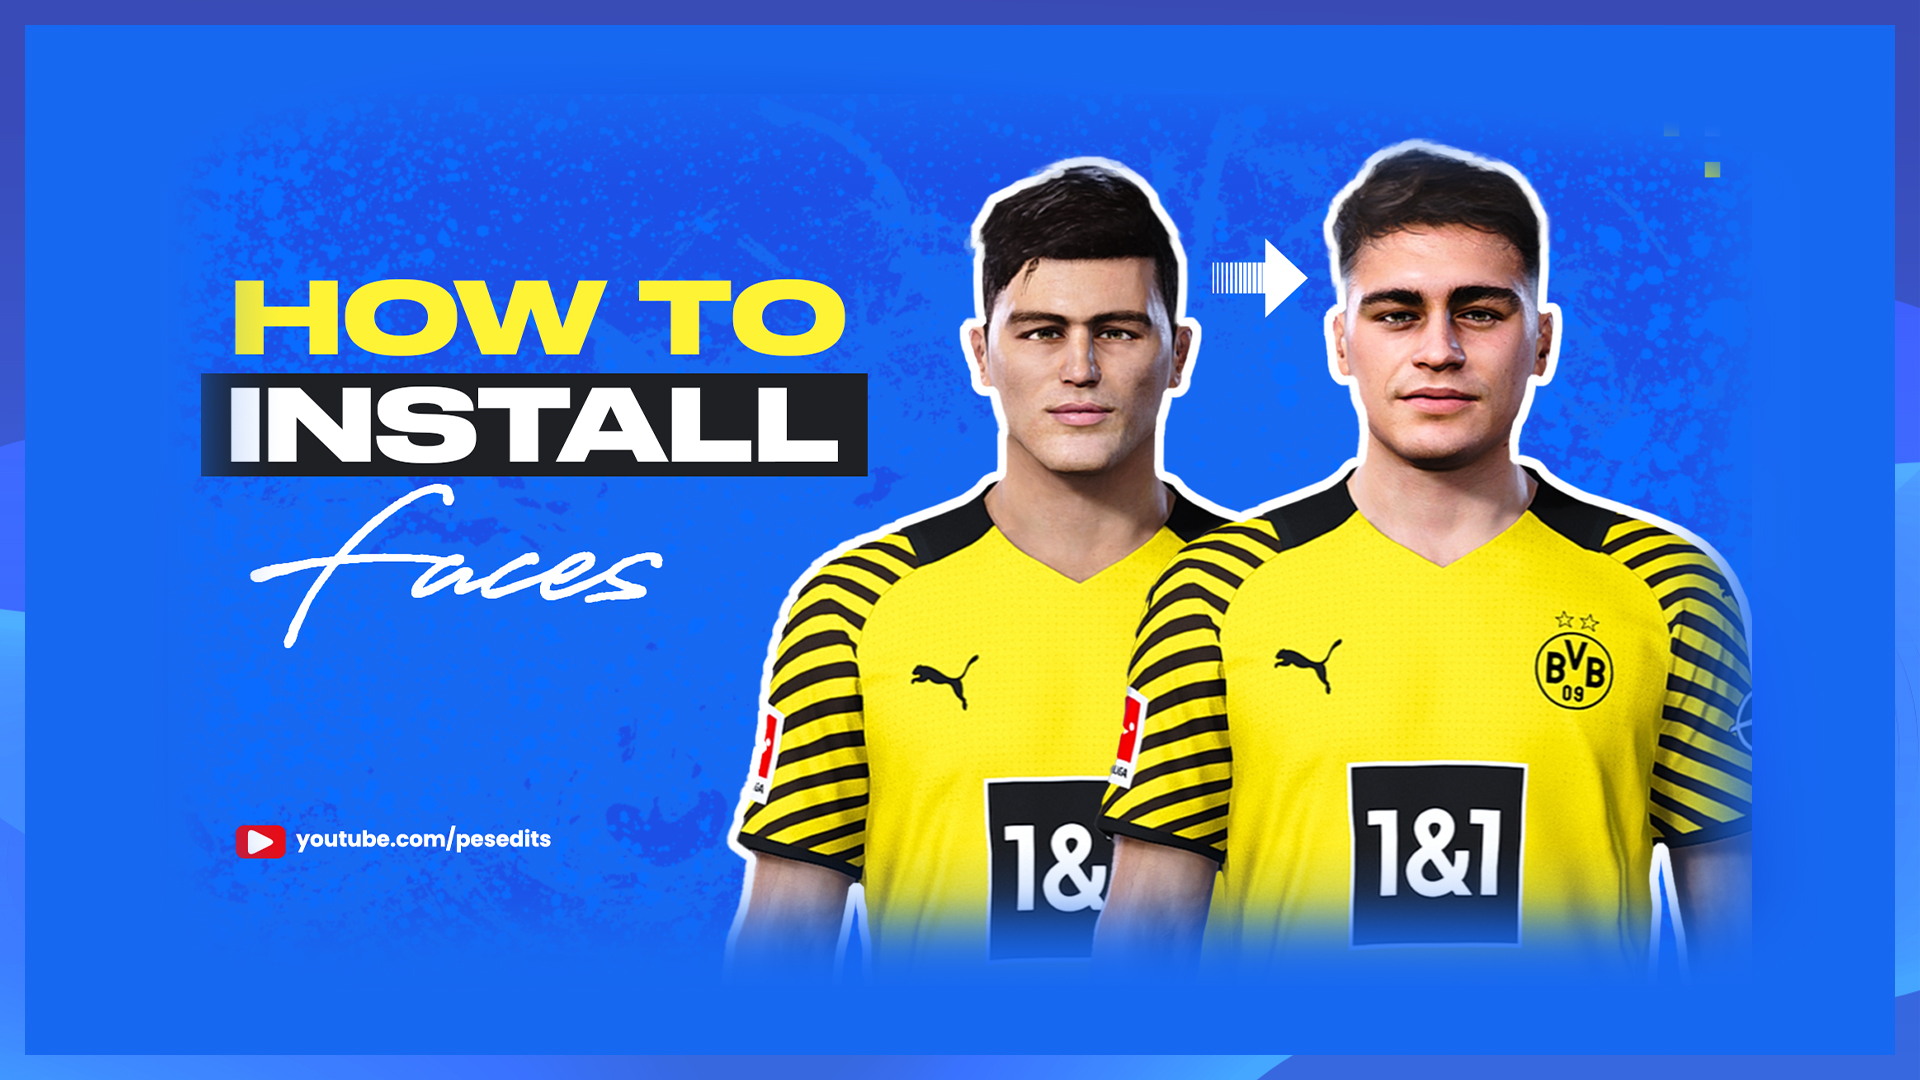 How To Install PES 2021 - 2020 - 2019 Faces